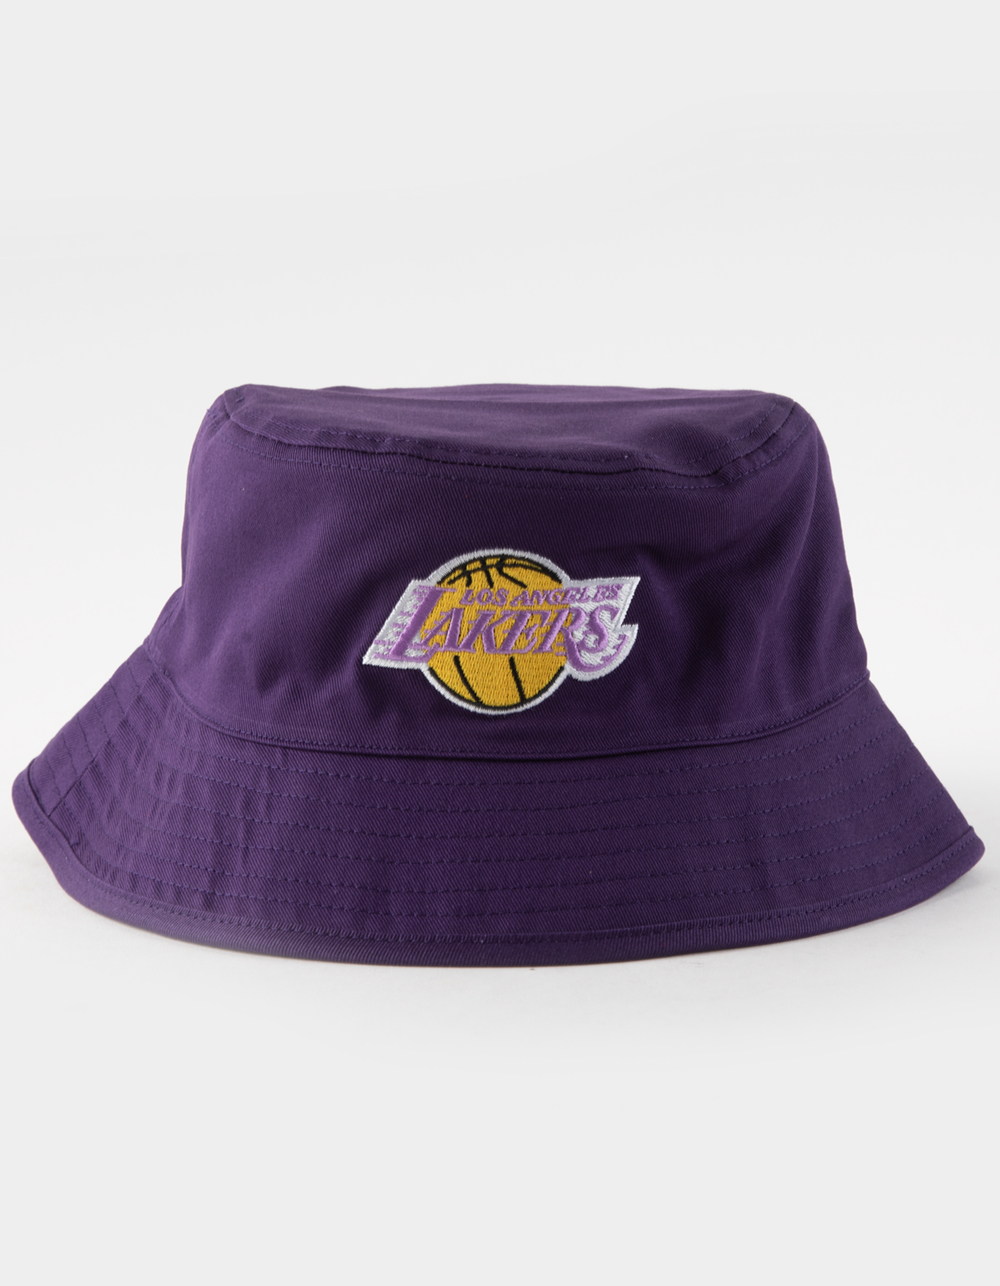 MITCHELL & NESS Los Angeles Lakers Reversible Bucket Hat